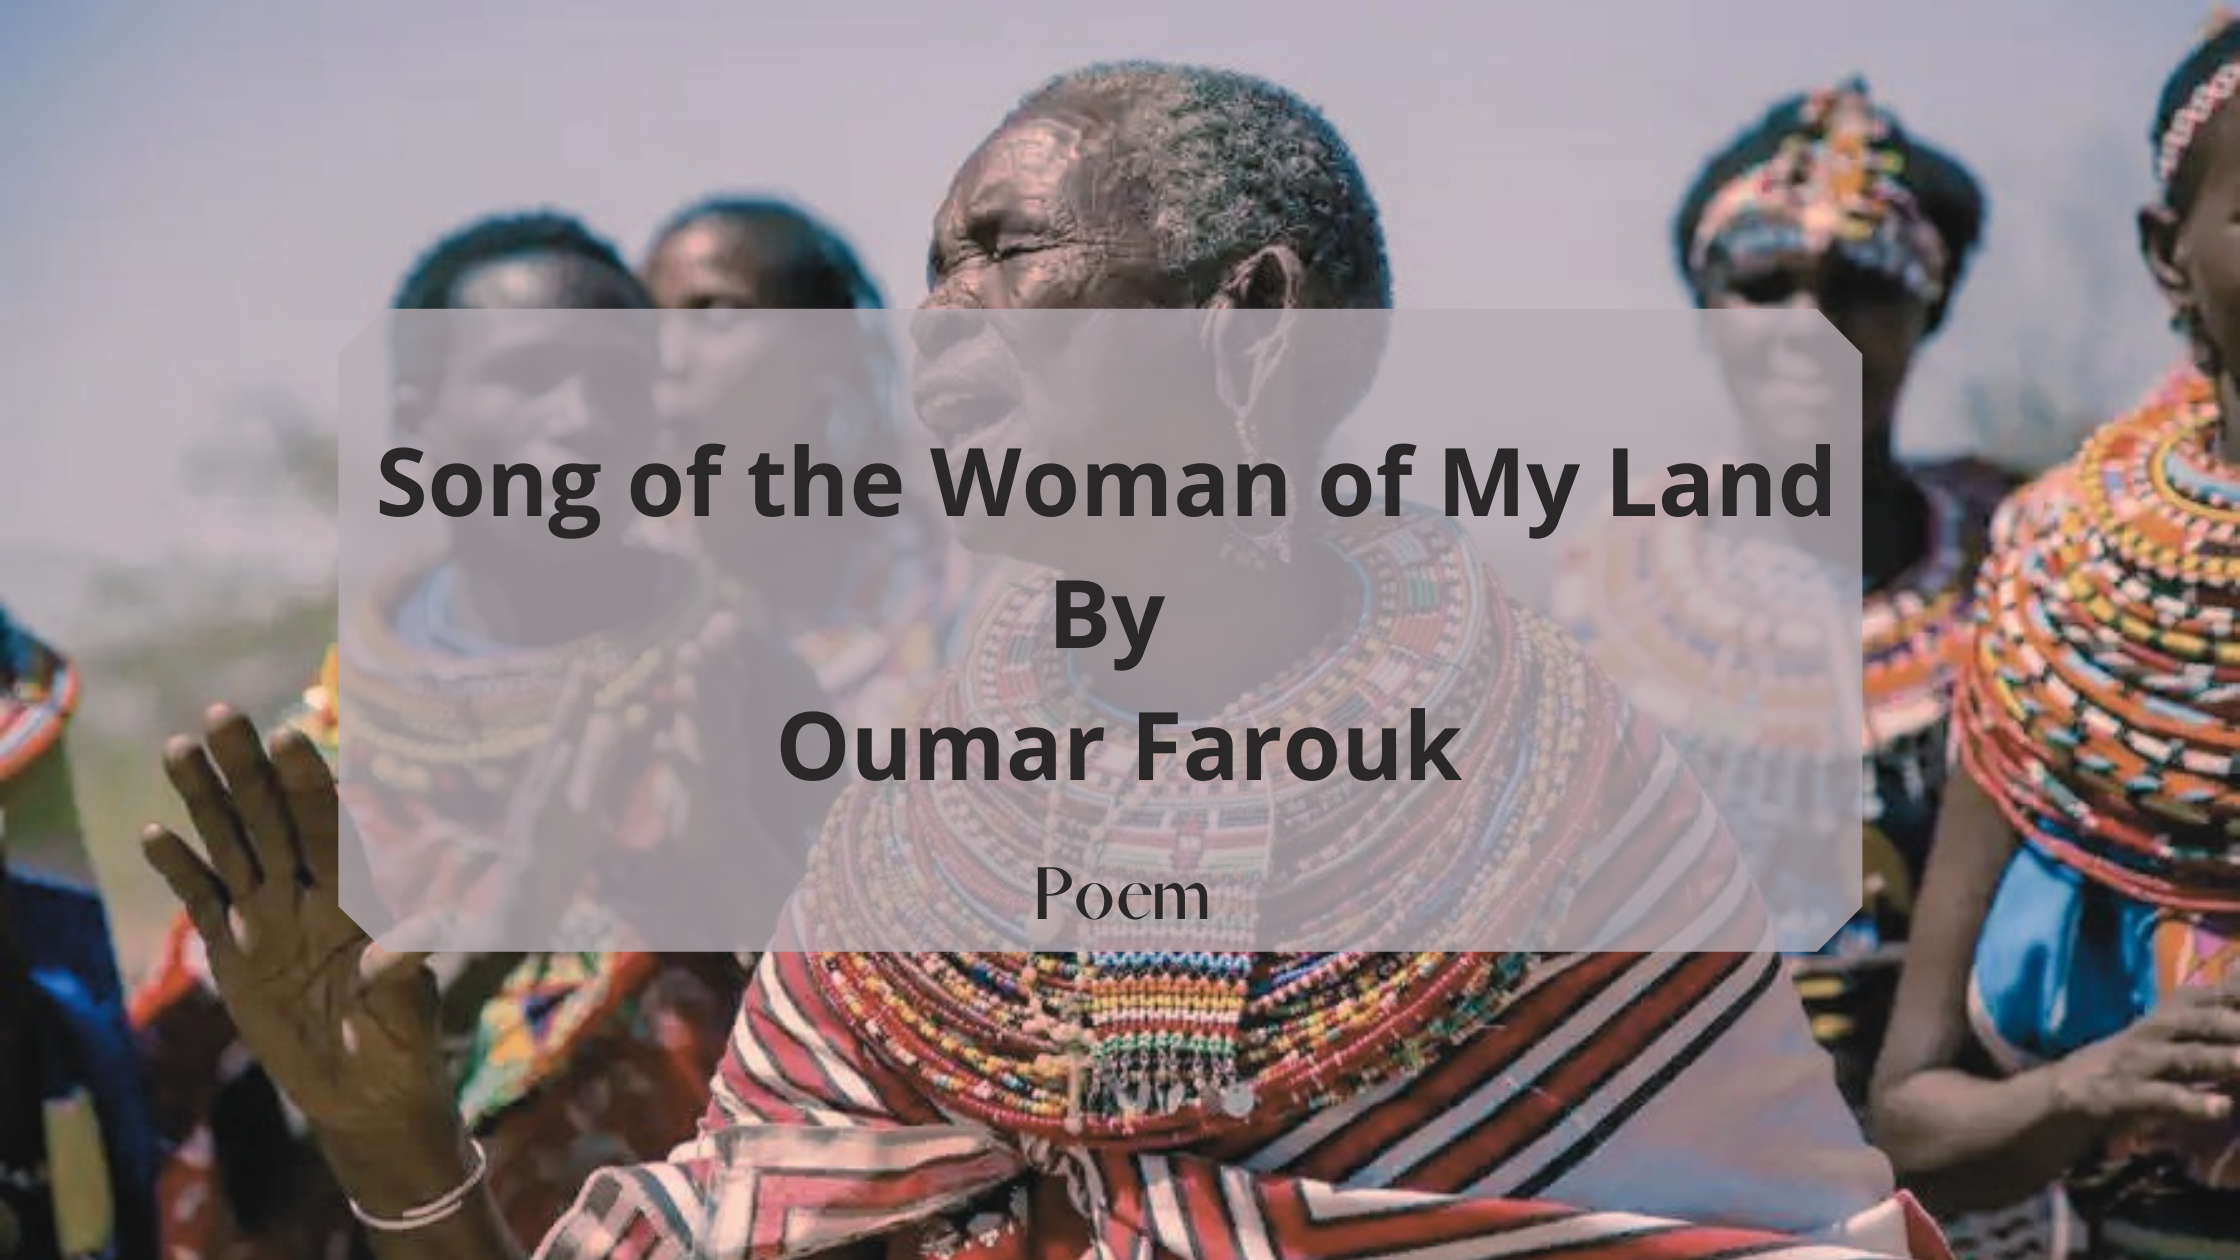 THE SONG OF THE WOMEN OF MY LAND POEM BY OUMAR FAROUK SESAY